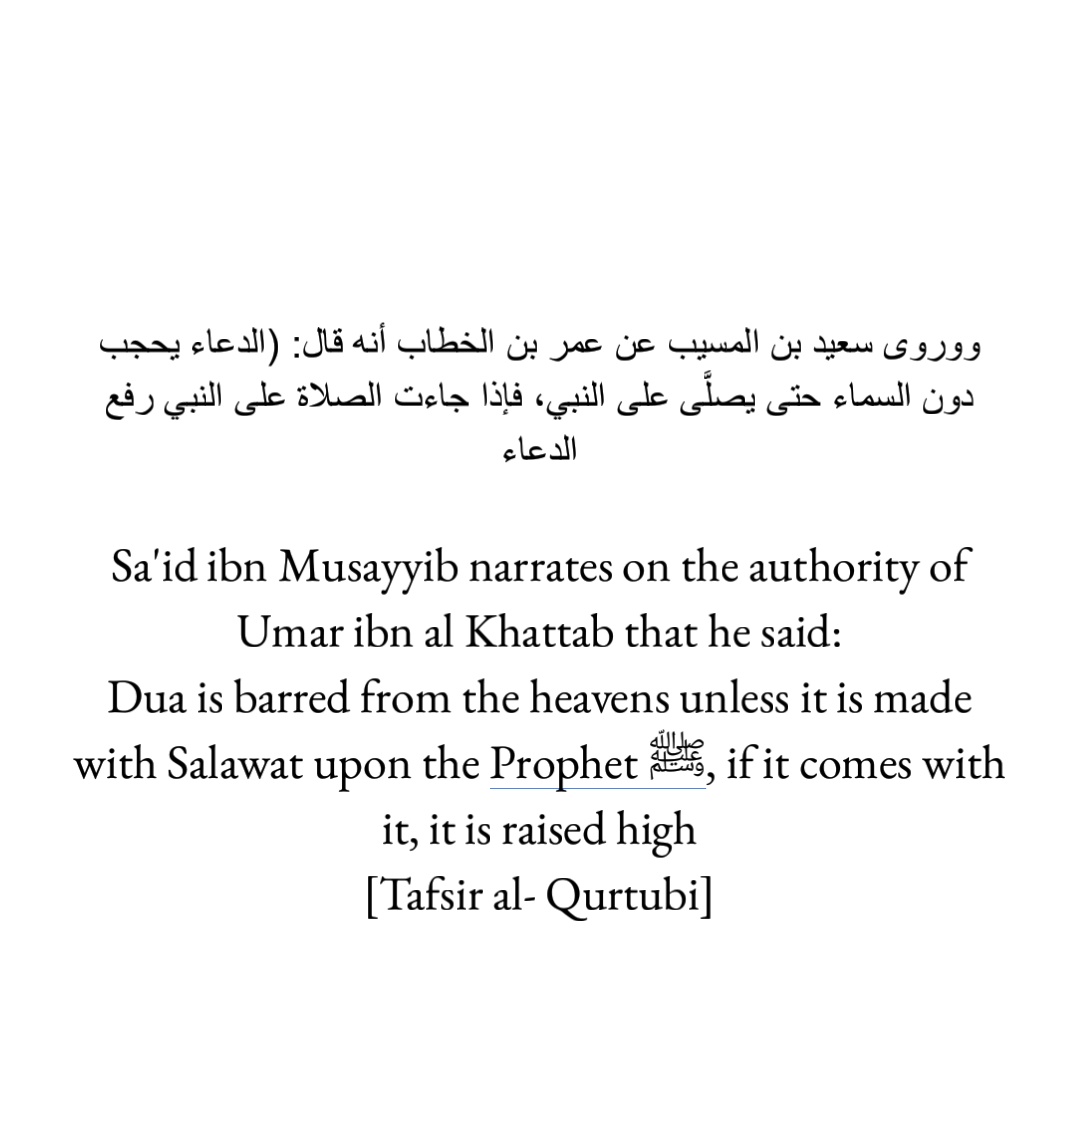 5. Imam Al Qurtubi narrates in his exegesis a report from Sa'id ibn Musayyib which he narrates on the authority of Umar ibn al Khattab regarding the pertinent reality of the salawat as it pertains to our communication with Allah. (Yes it is Marfu')